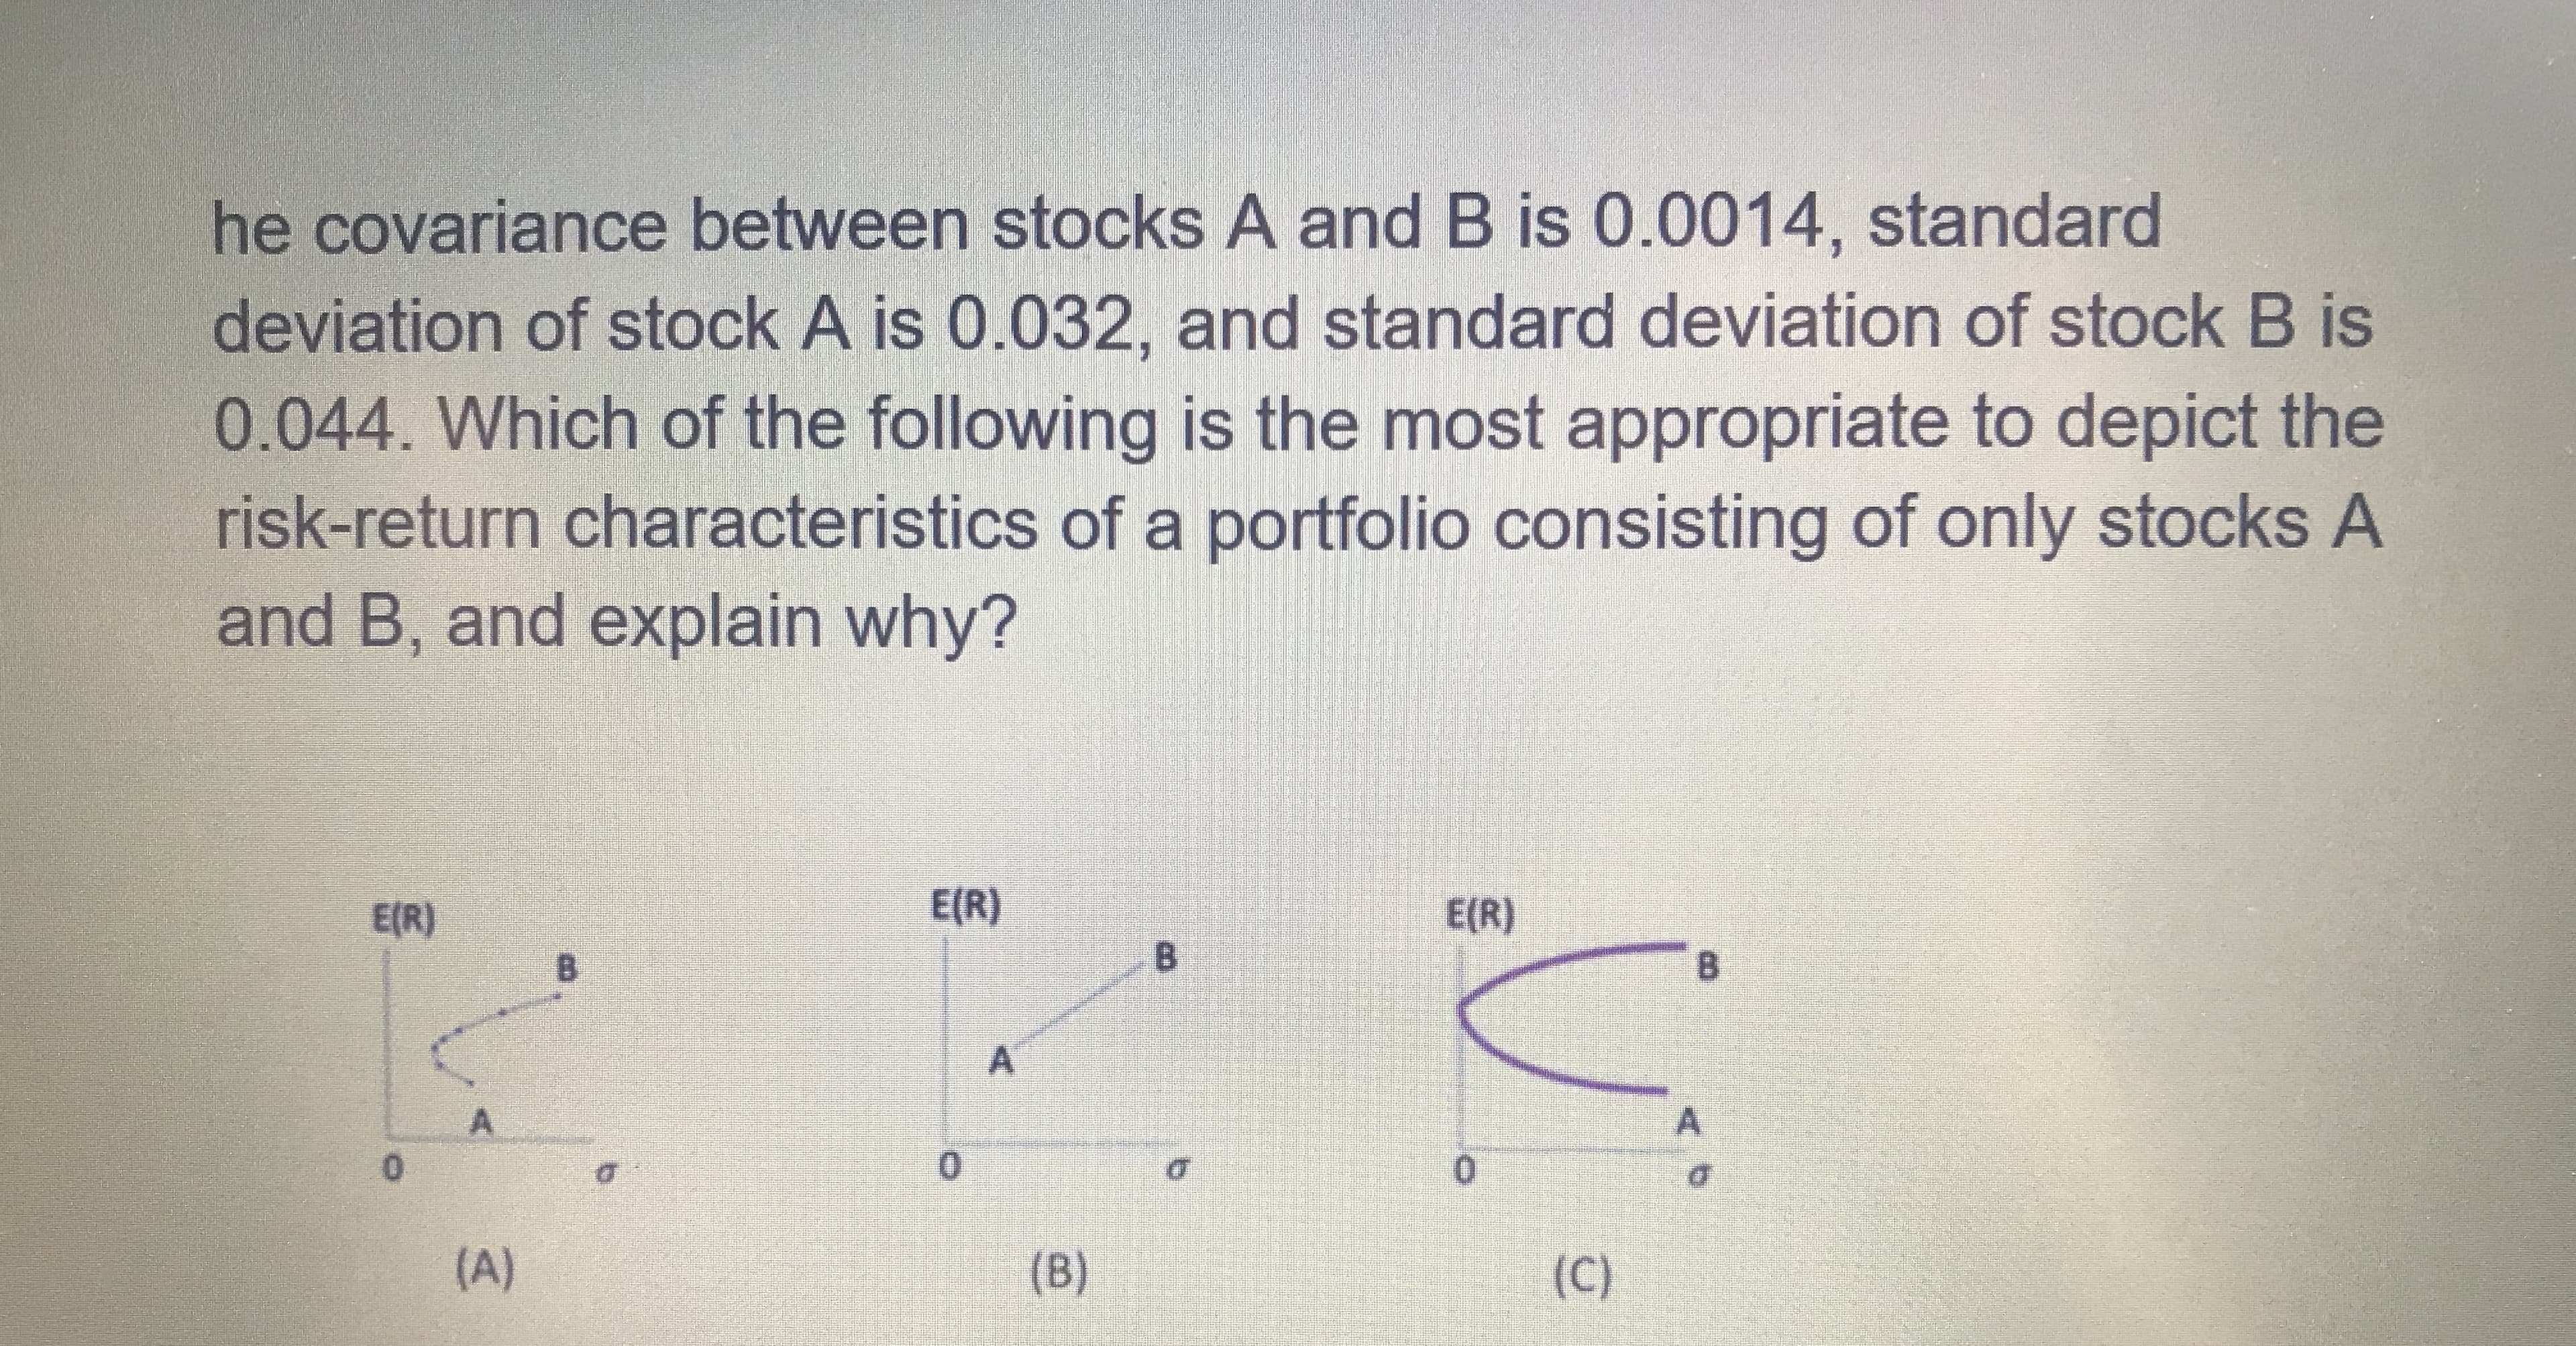 he covariance between stocks A and B is 0.0014, standard
deviation of stock A is 0.032, and standard deviation of stock B is
0.044. Which of the following is the most appropriate to depict the
risk-return characteristics of a portfolio consisting of only stocks A
